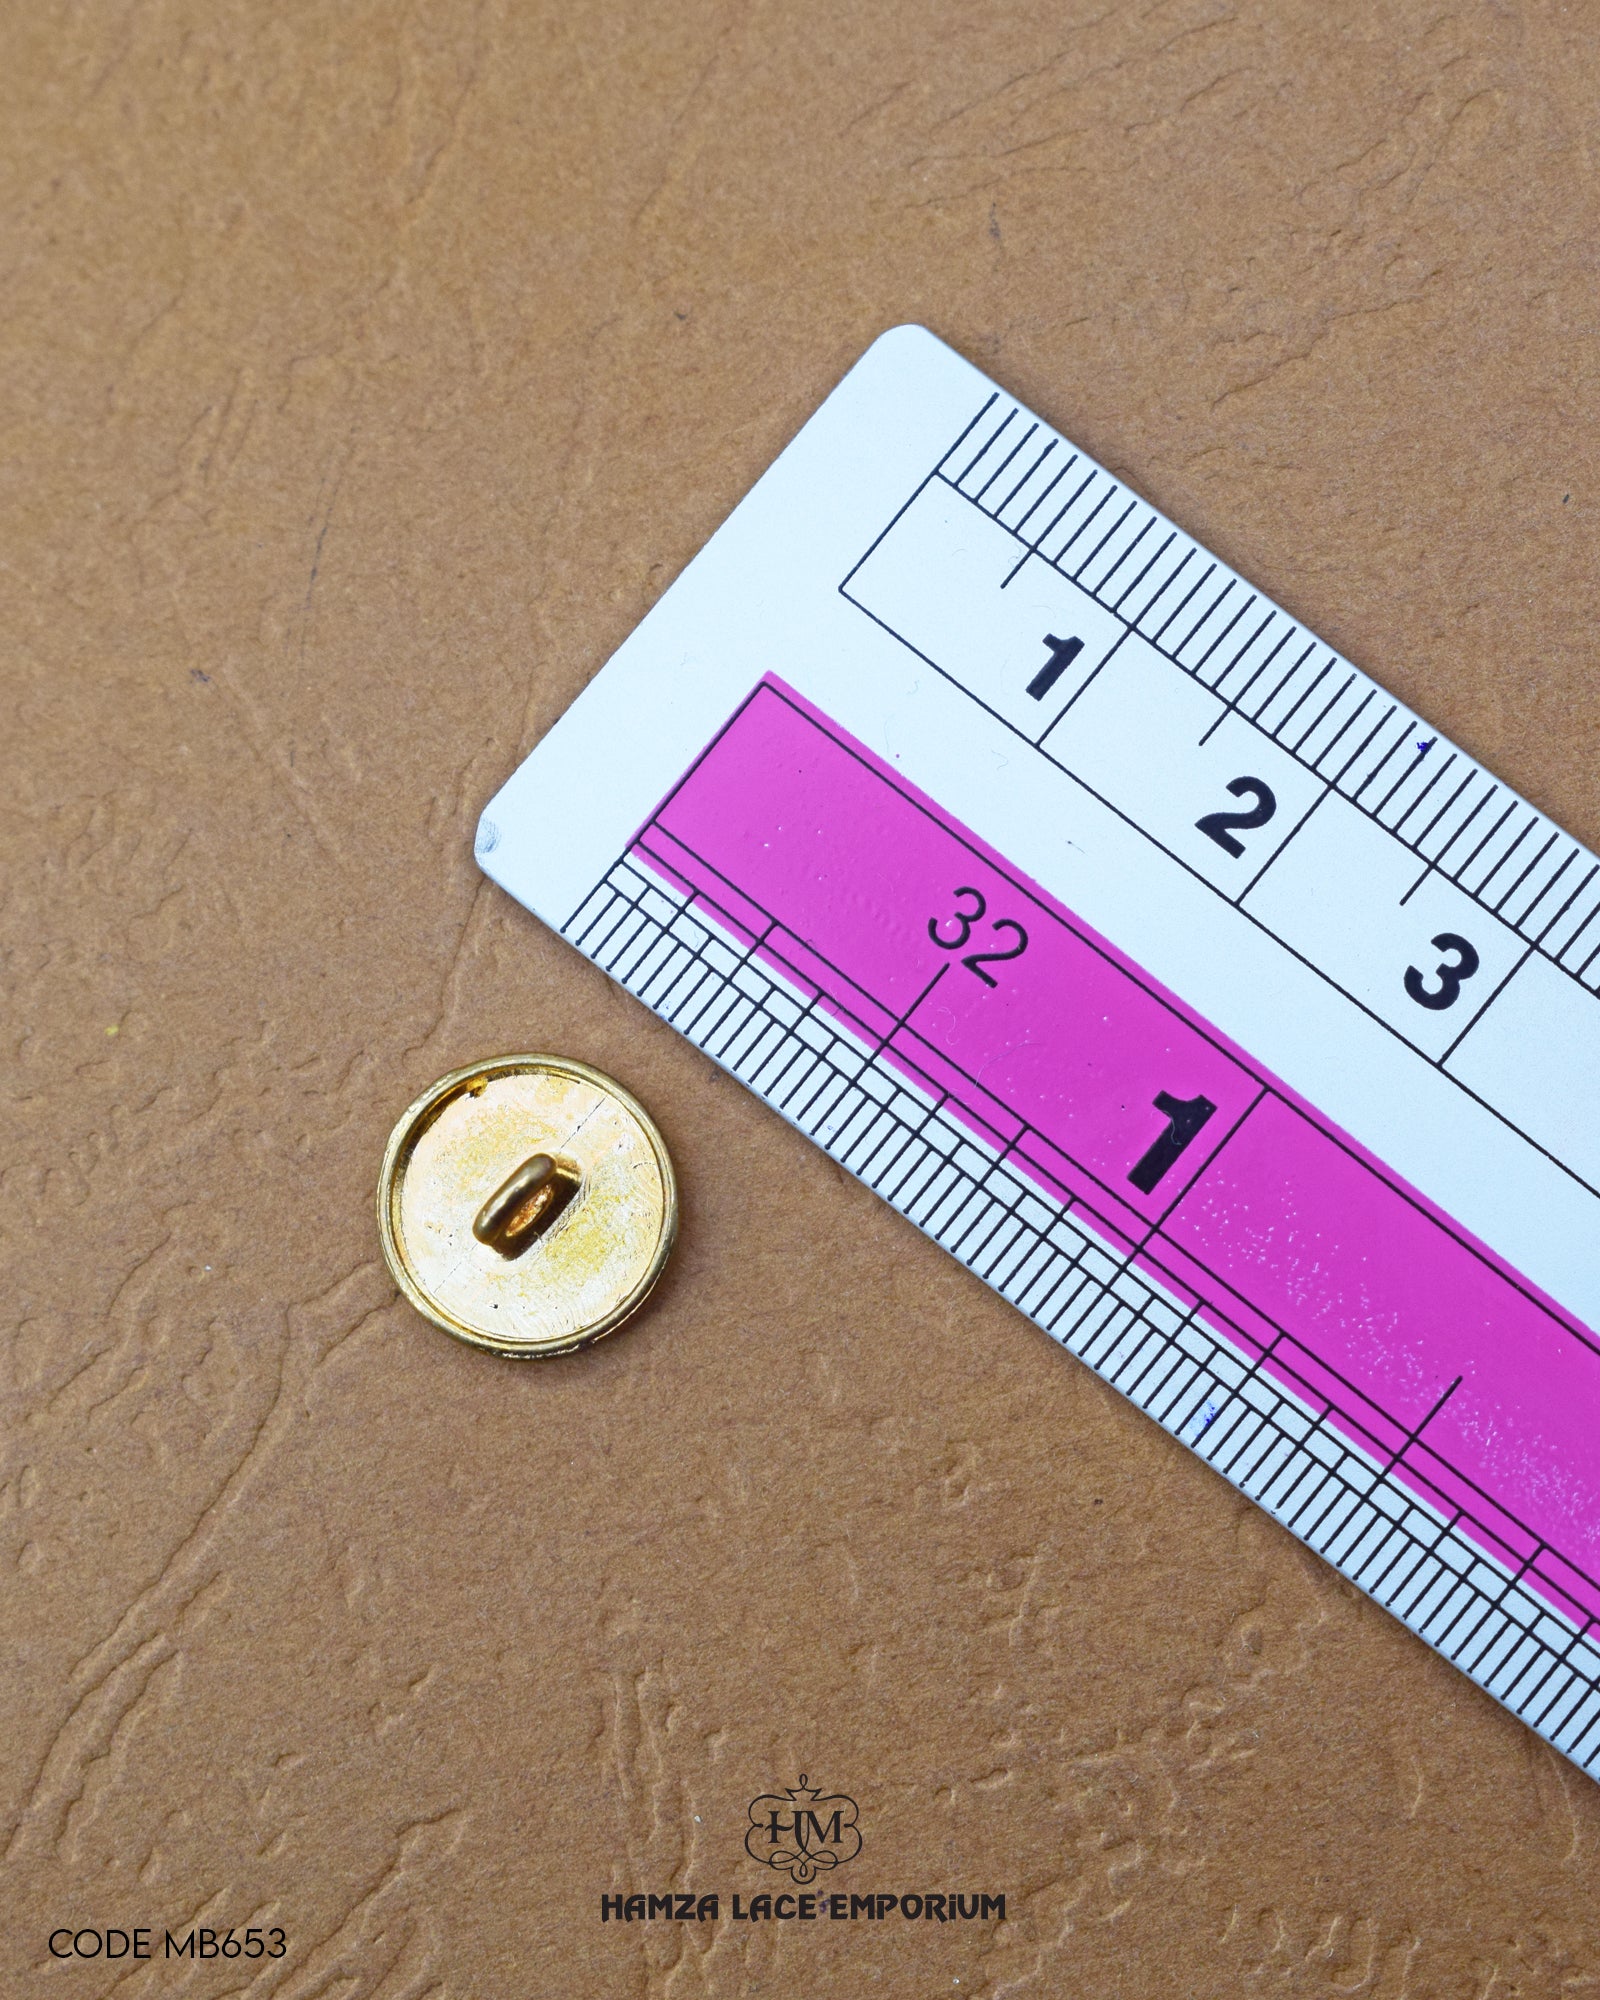 The size of the 'Golden Plane Metal Button MB653' is measured using a ruler